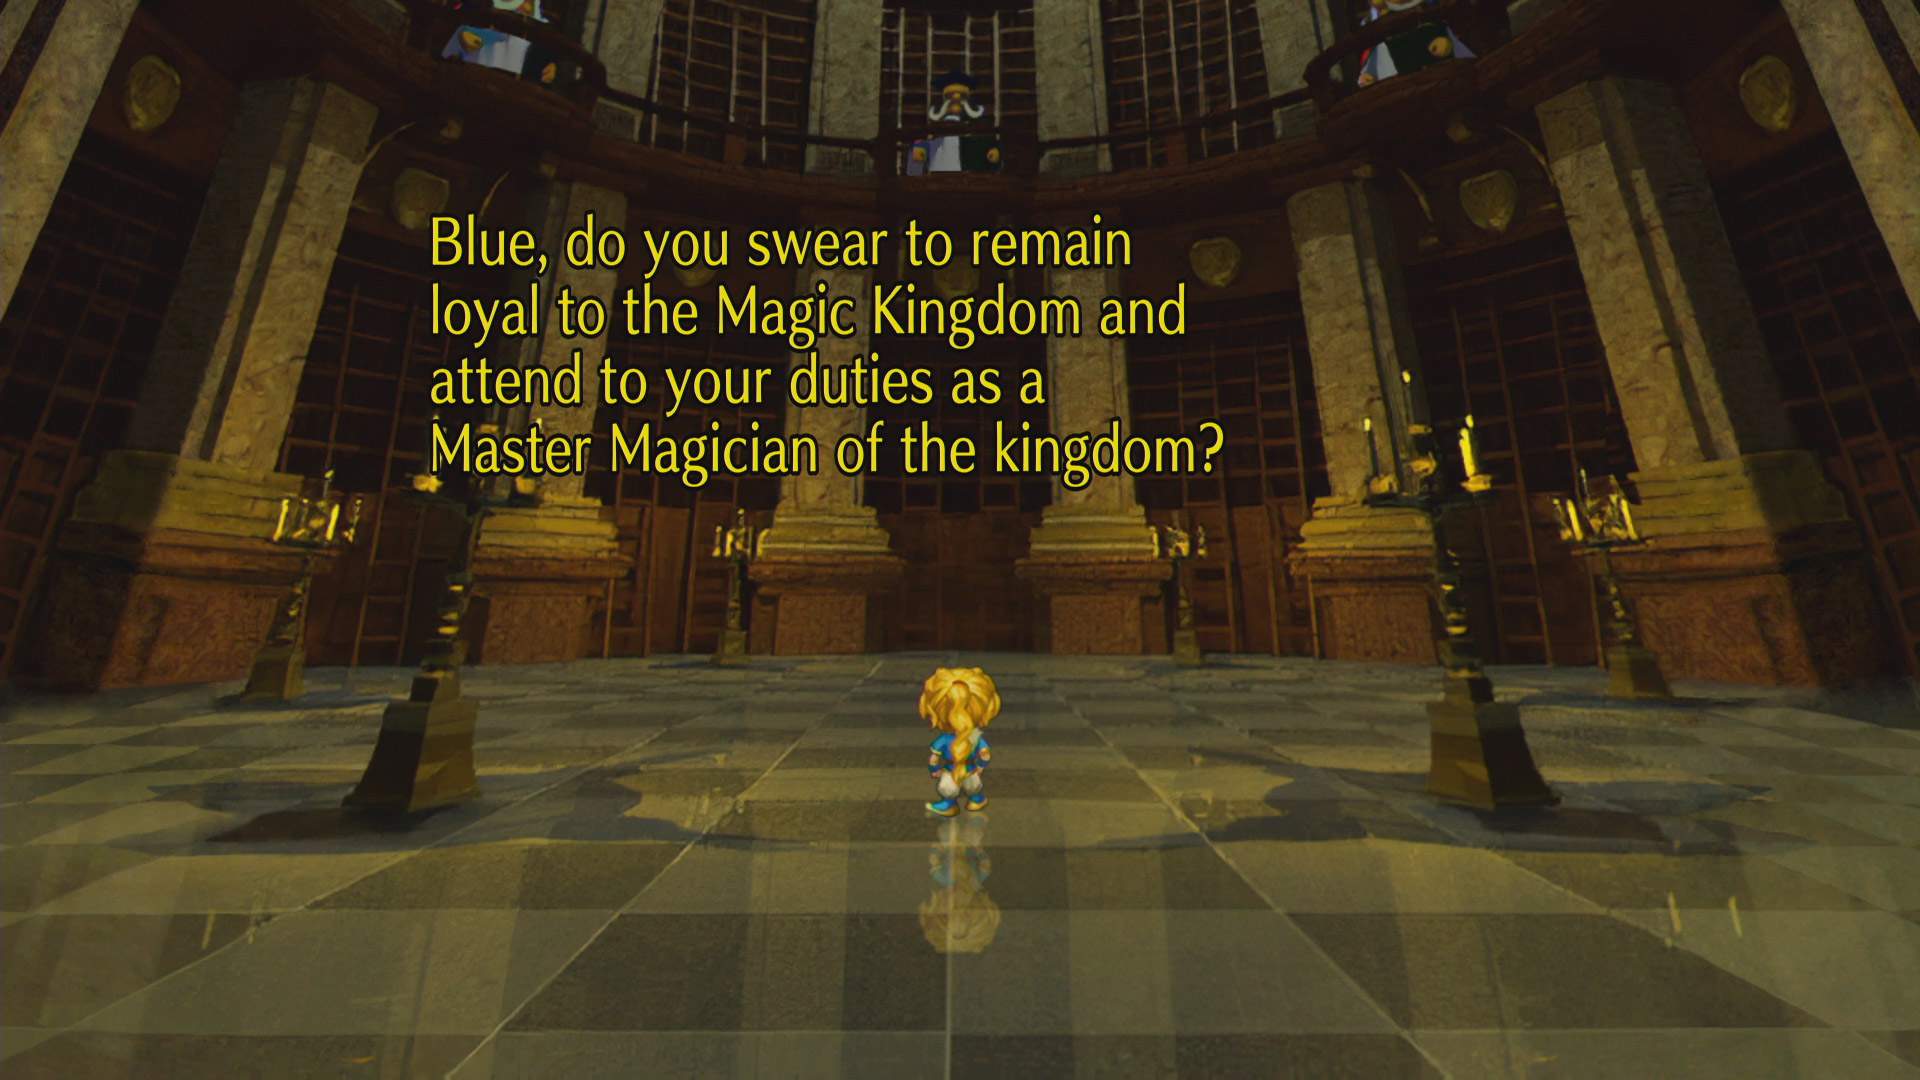 SaGa Frontier Remastered character BLUE stands in the center of a room, with characters above looking down on him. There are on-screen game dialogue lines.